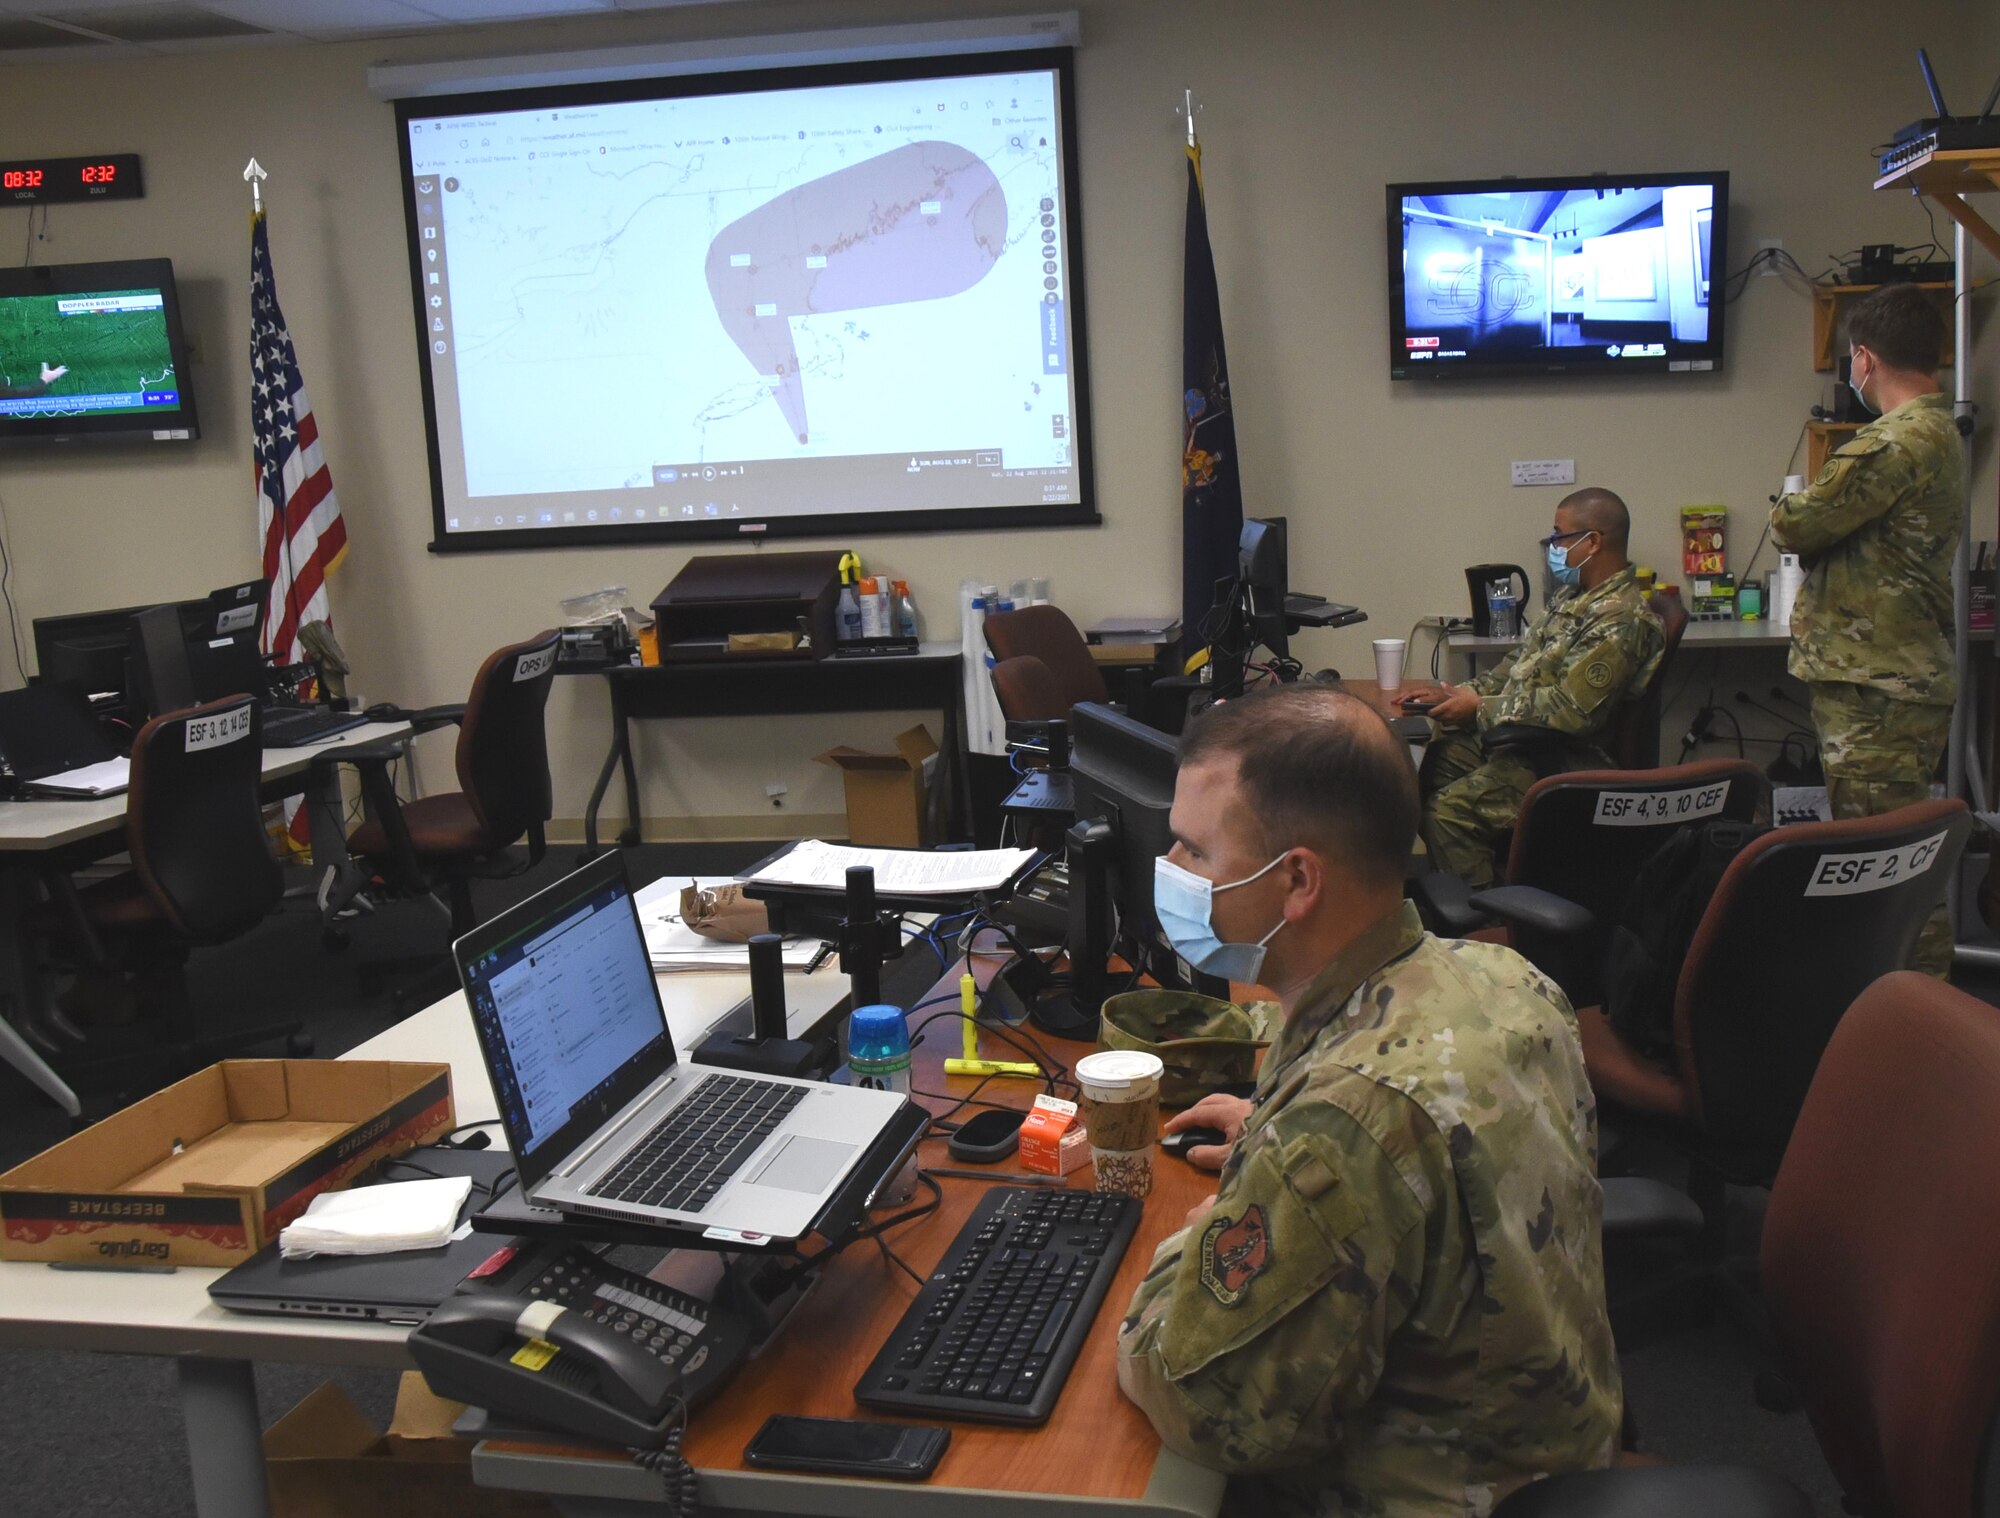 New York National Guard members monitor the approach of Hurricane Henri in the emergency operations center at the F.S. Gabreski Air National Guard Base in Westhampton Beach, New York, Aug. 22, 2021. The New York National Guard activated 500 Soldiers and Airmen on Long Island, New York City and in the Hudson Valley and Albany areas to assist as needed.